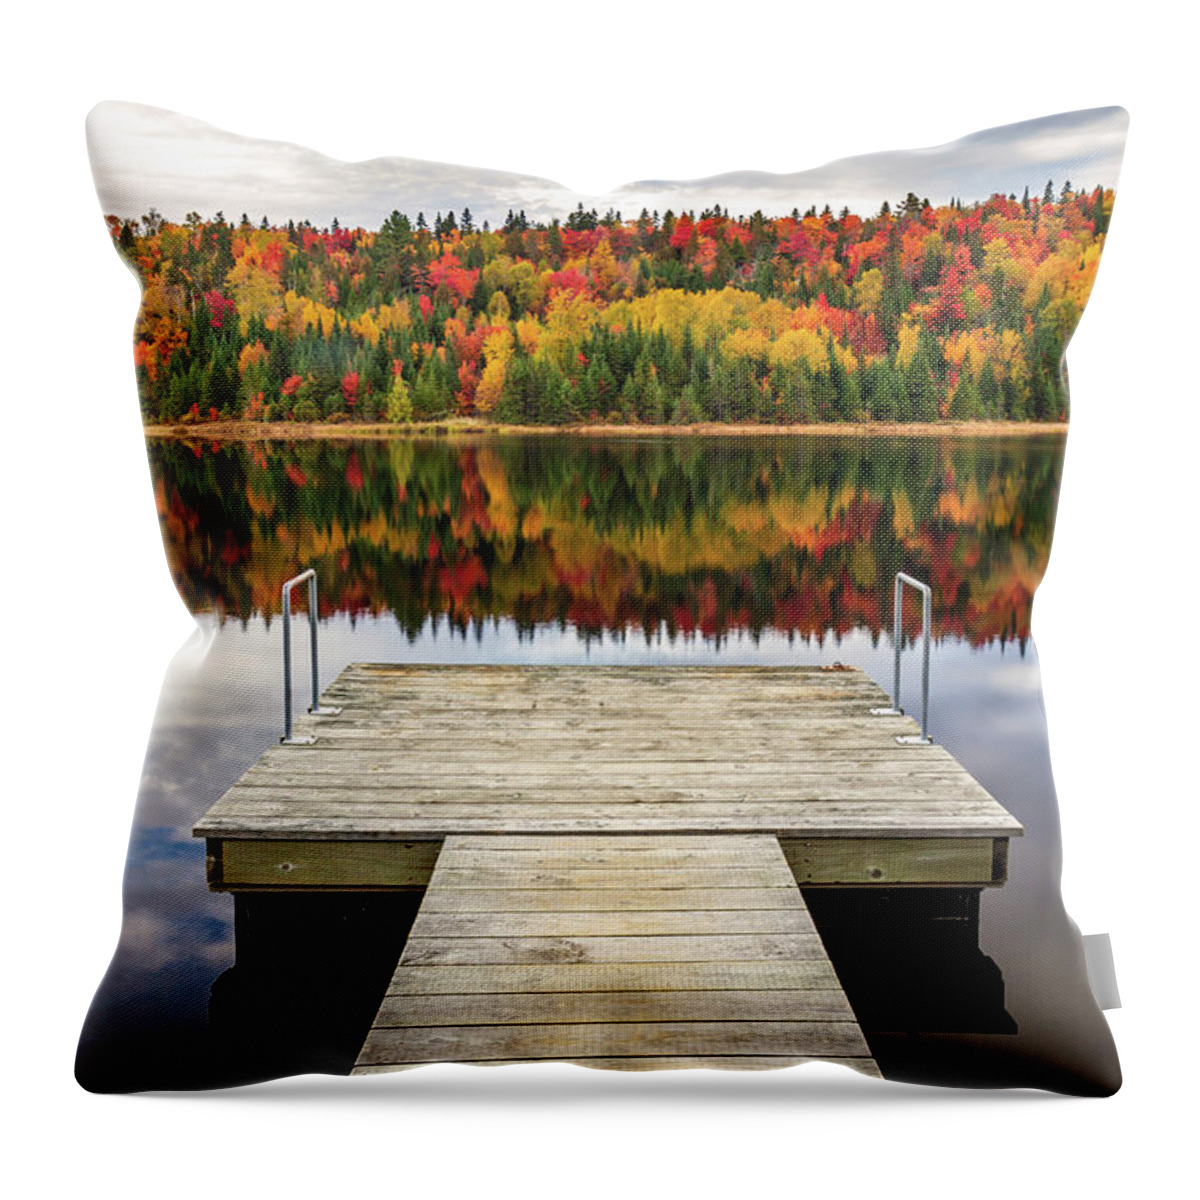 Autumn Throw Pillow featuring the photograph Autumn Reflection by Pierre Leclerc Photography